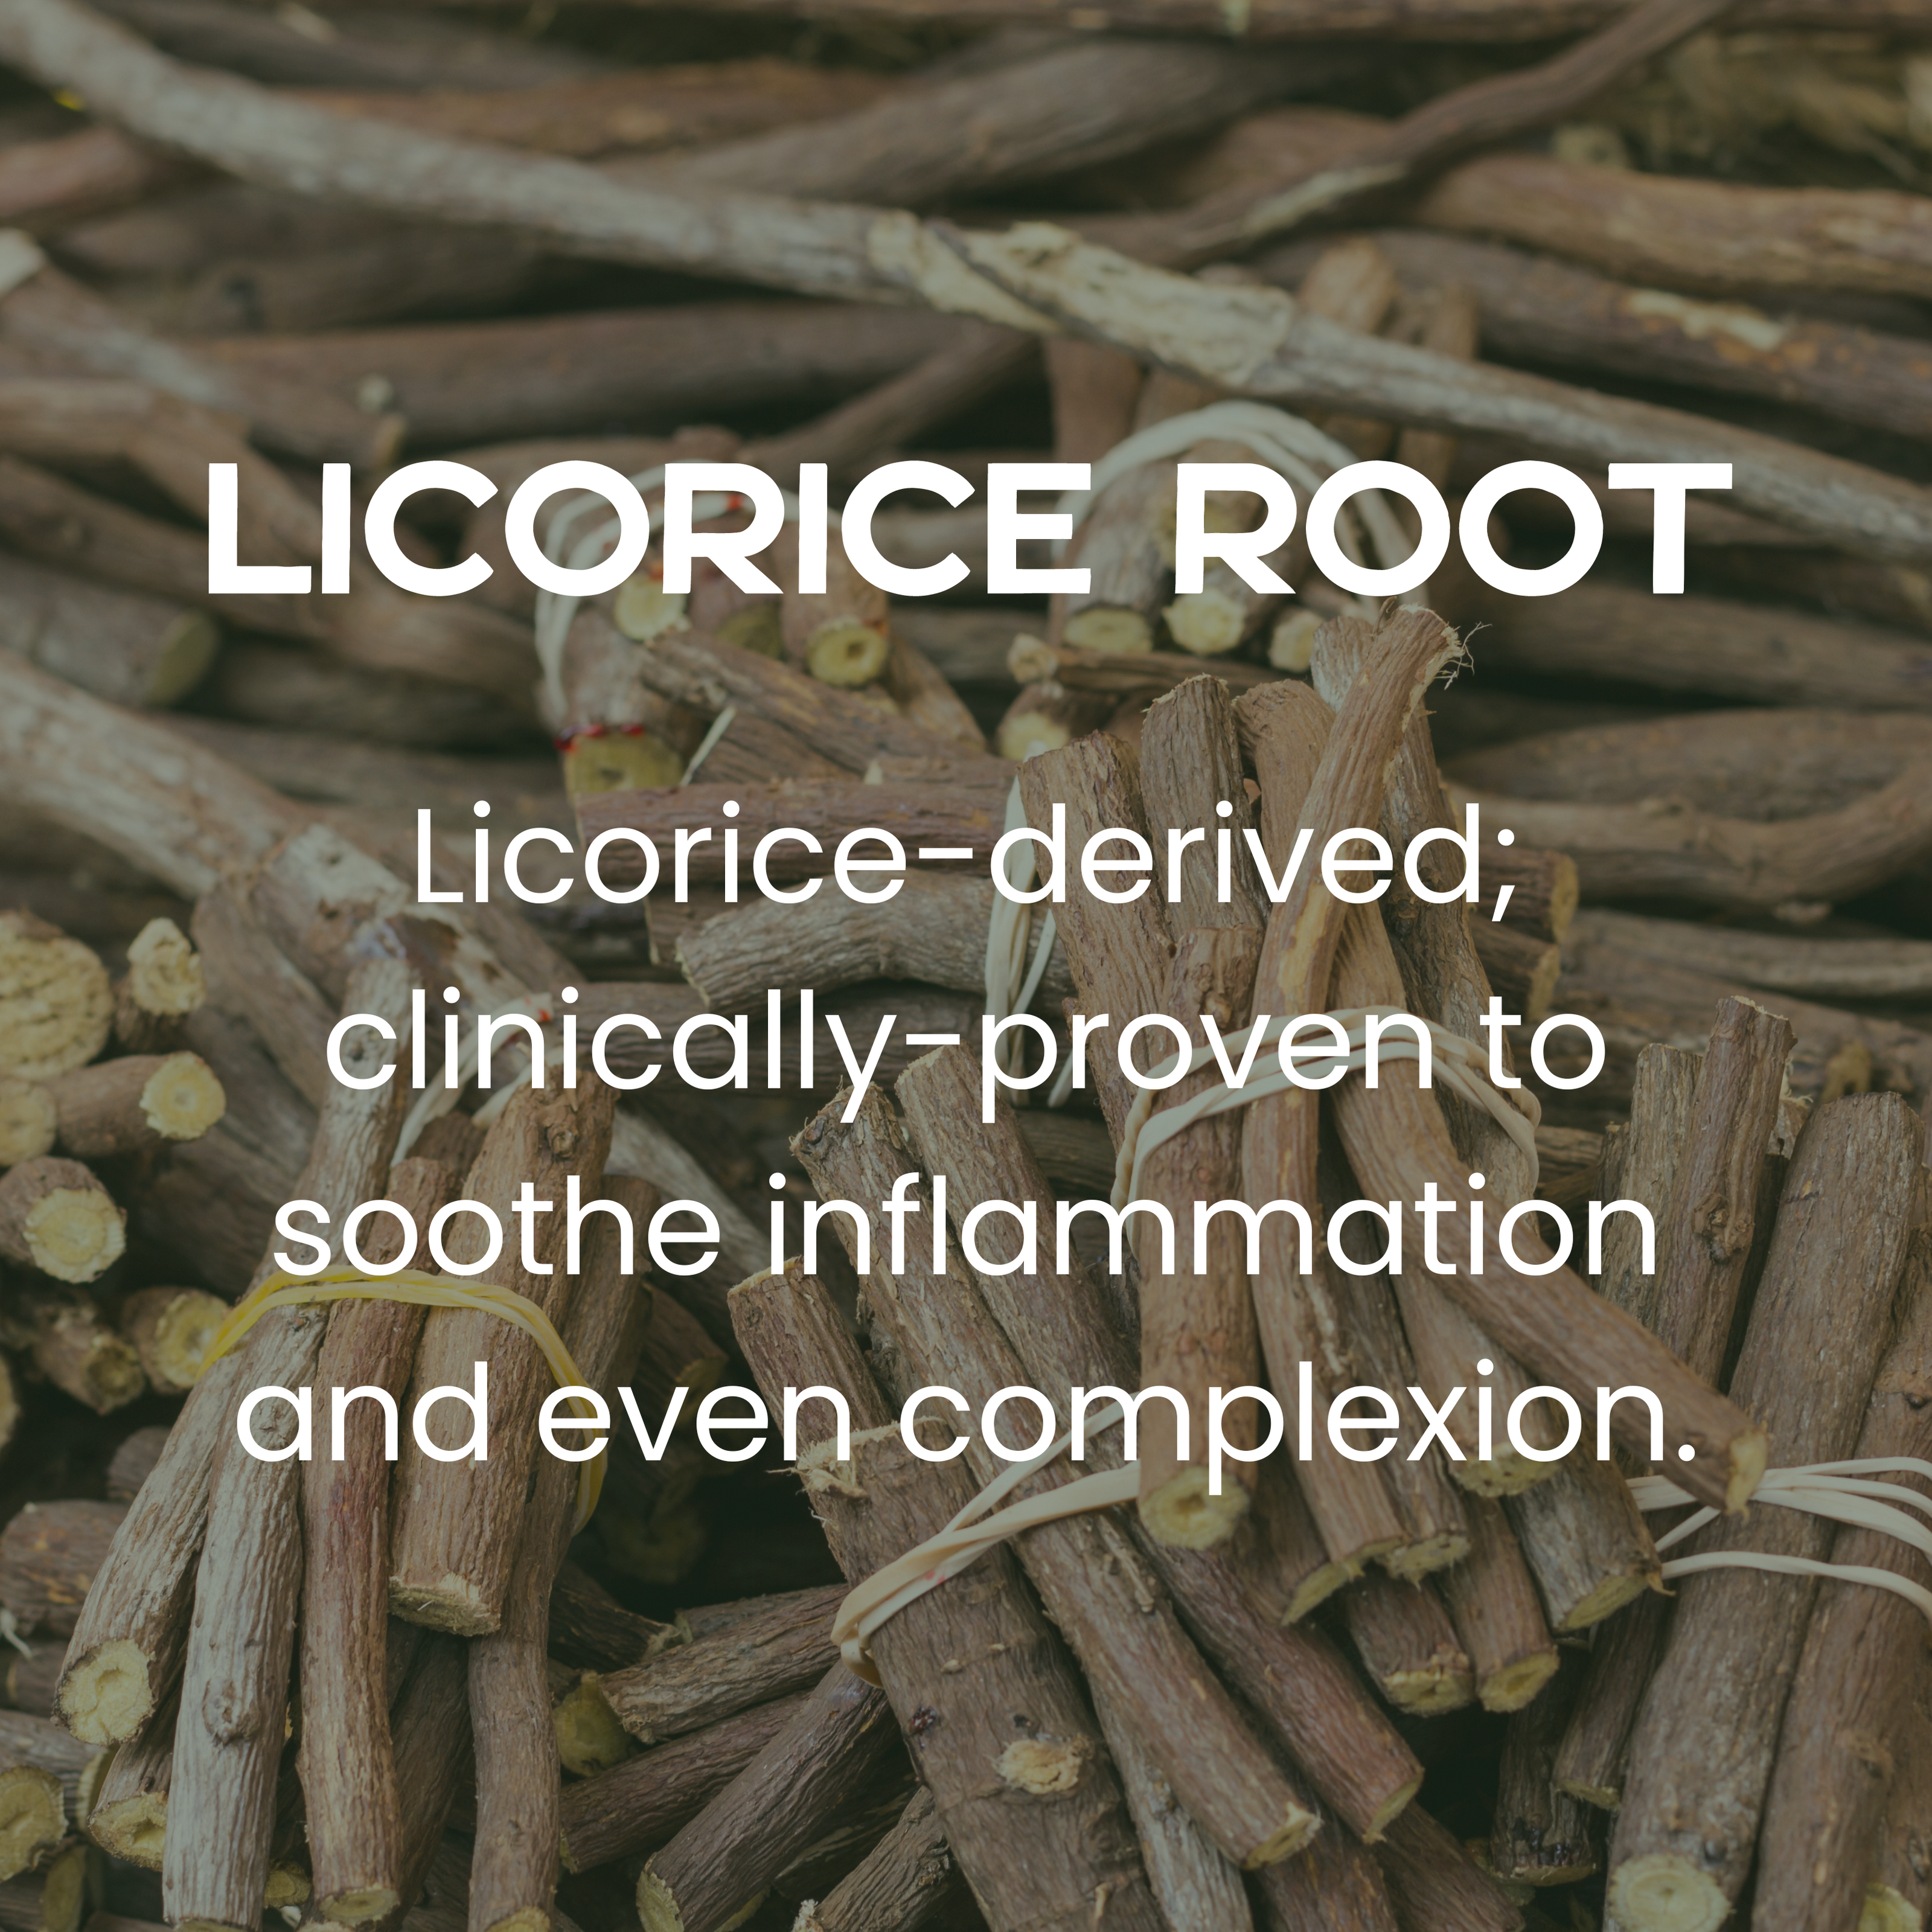 Licorice Root Ingredient Breakdown - Licorice-derived; clinically-proven to soothe inflammation and even complexion.